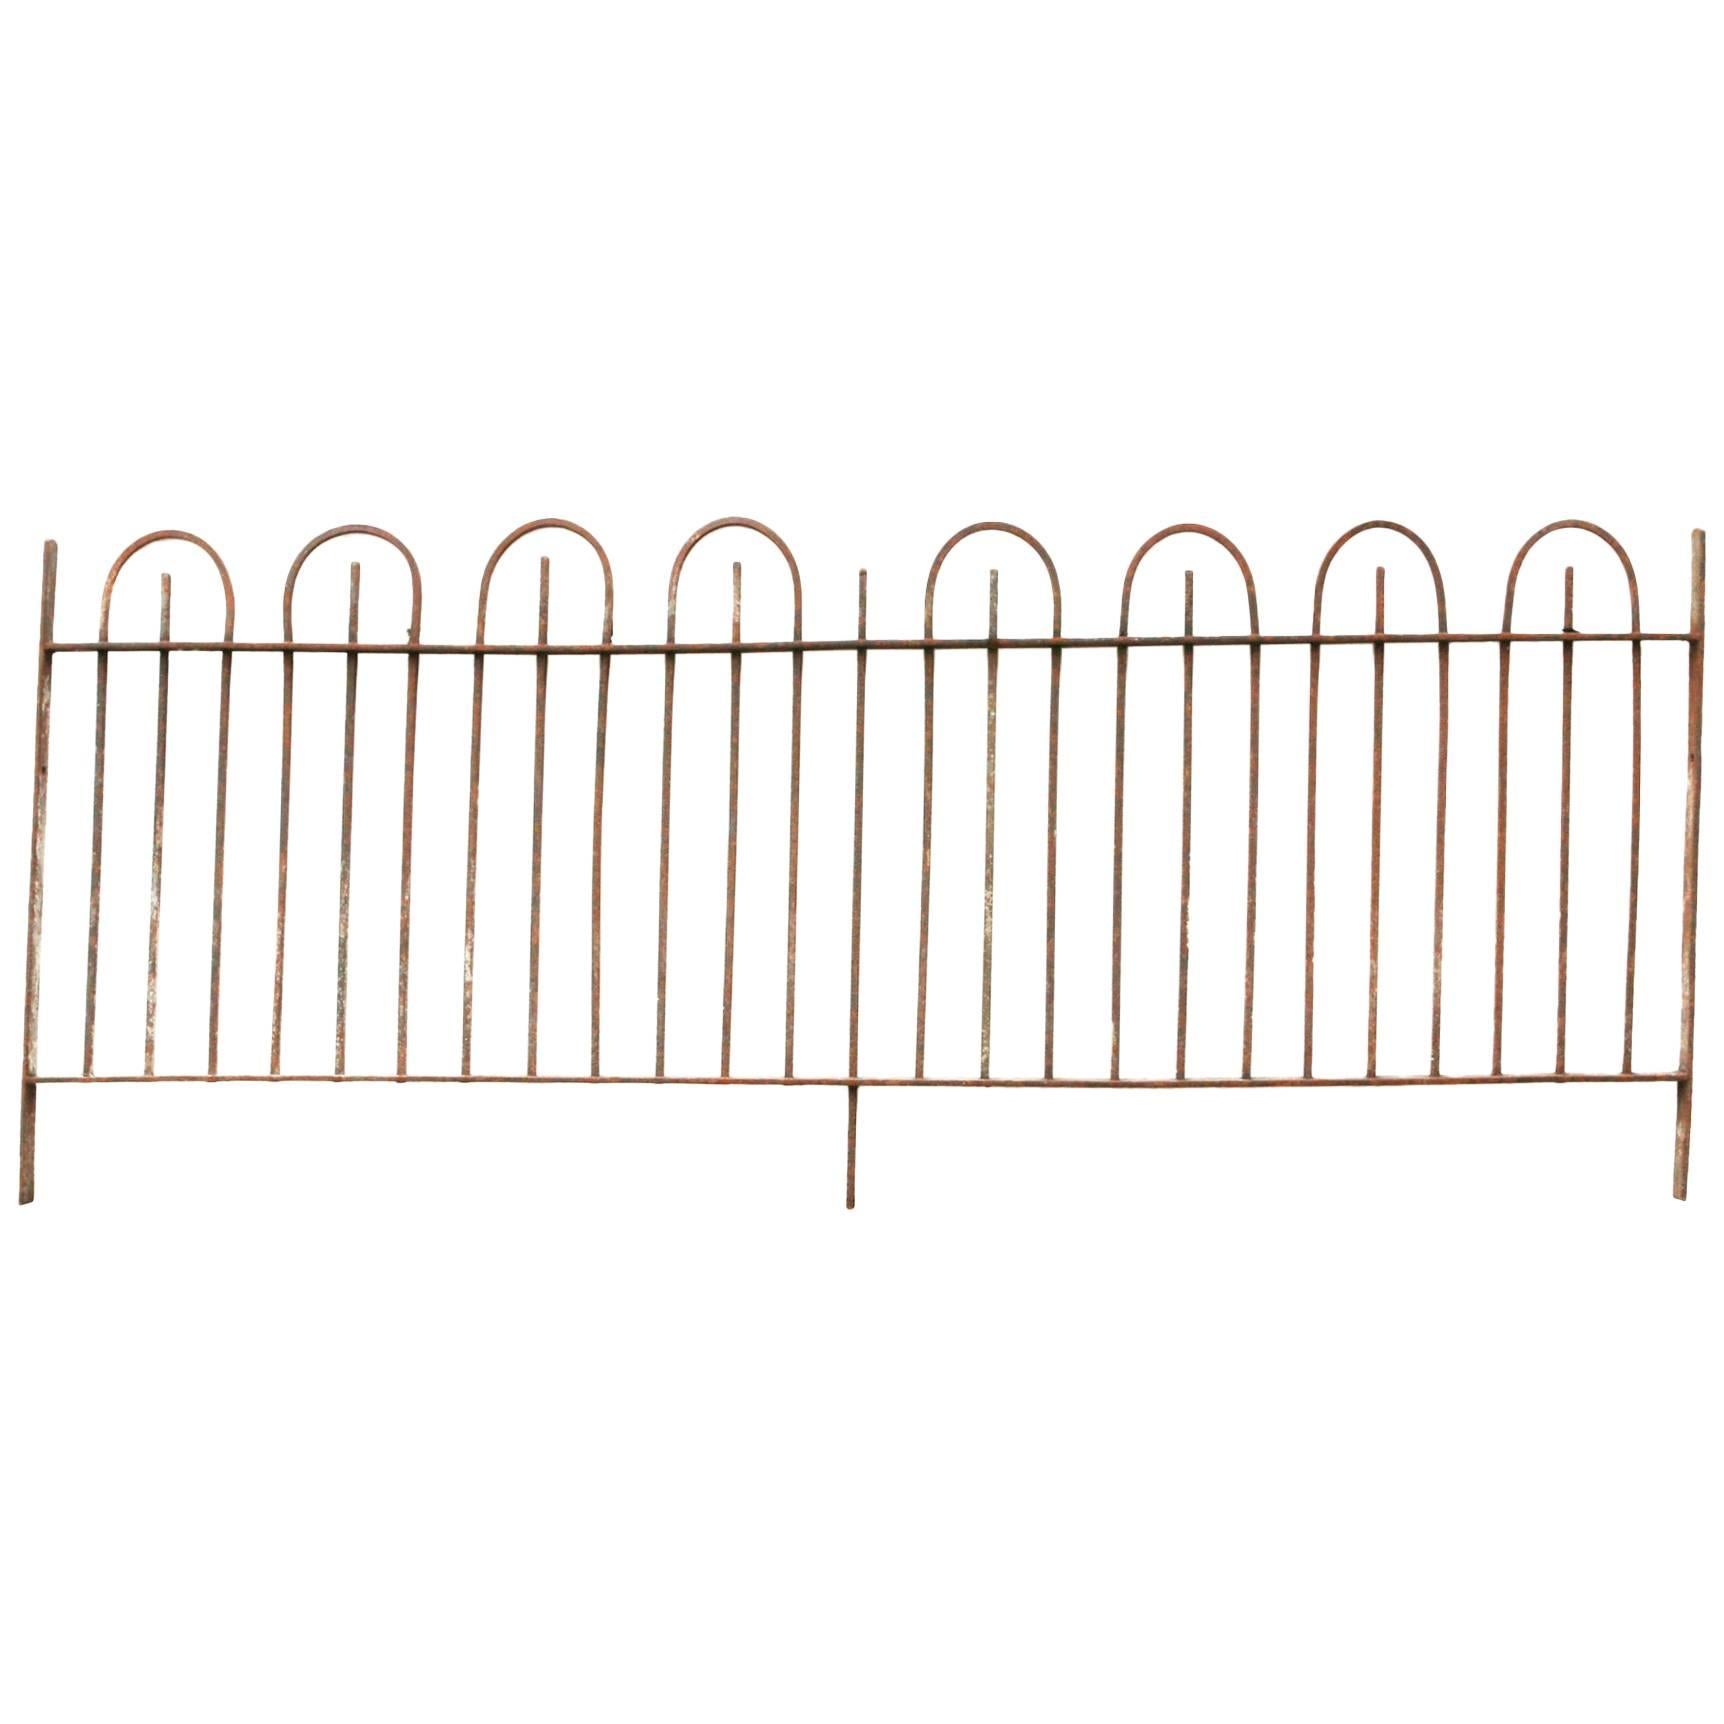 19th Century Wrought Iron Hooped Top Railings with Side Gate